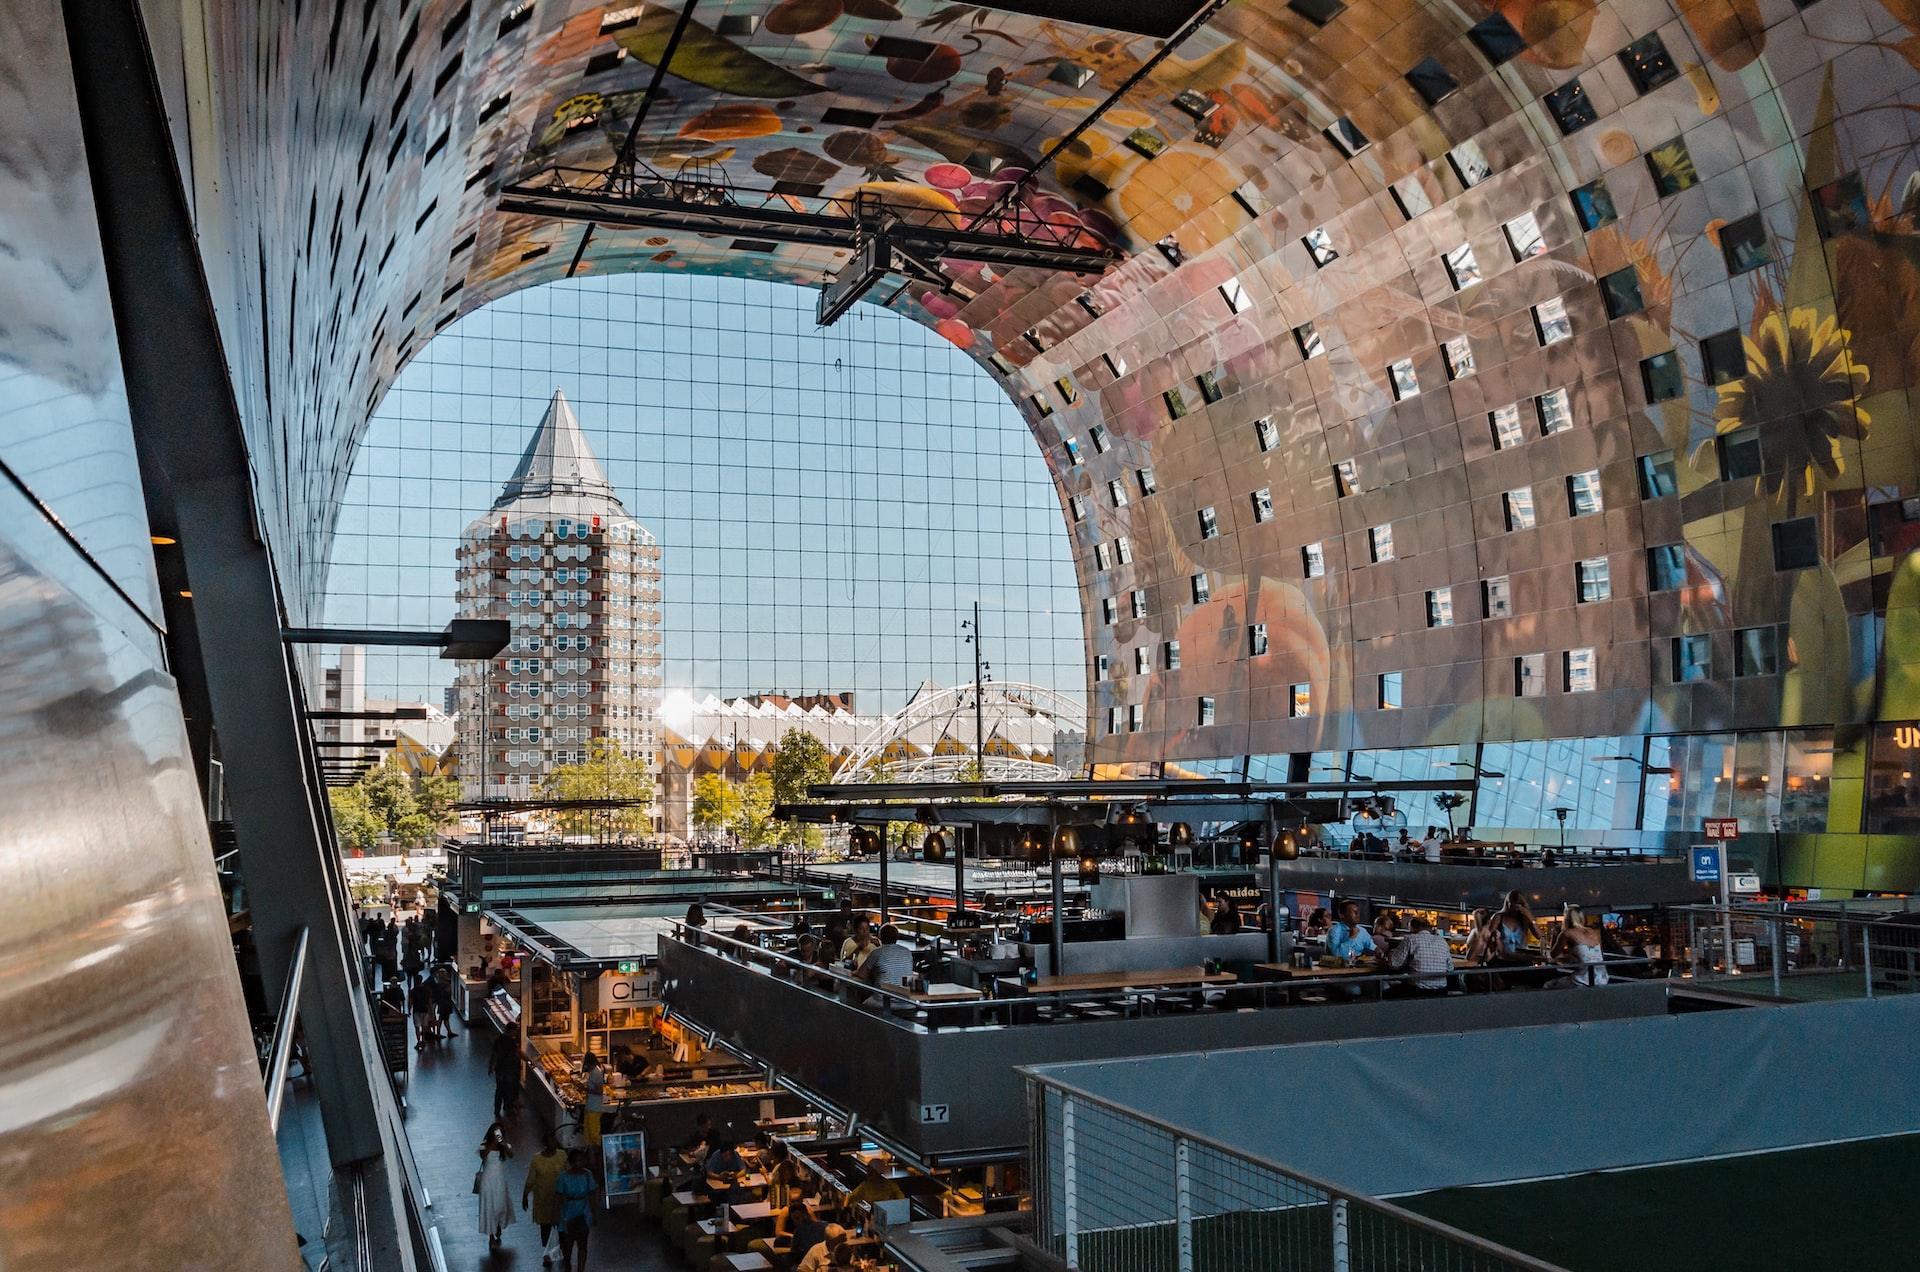 A photograph of the interior of an innovative market hall in Rotterdam which includes apartments looking into a covered market hall with large scale graphics of plants and flowers 